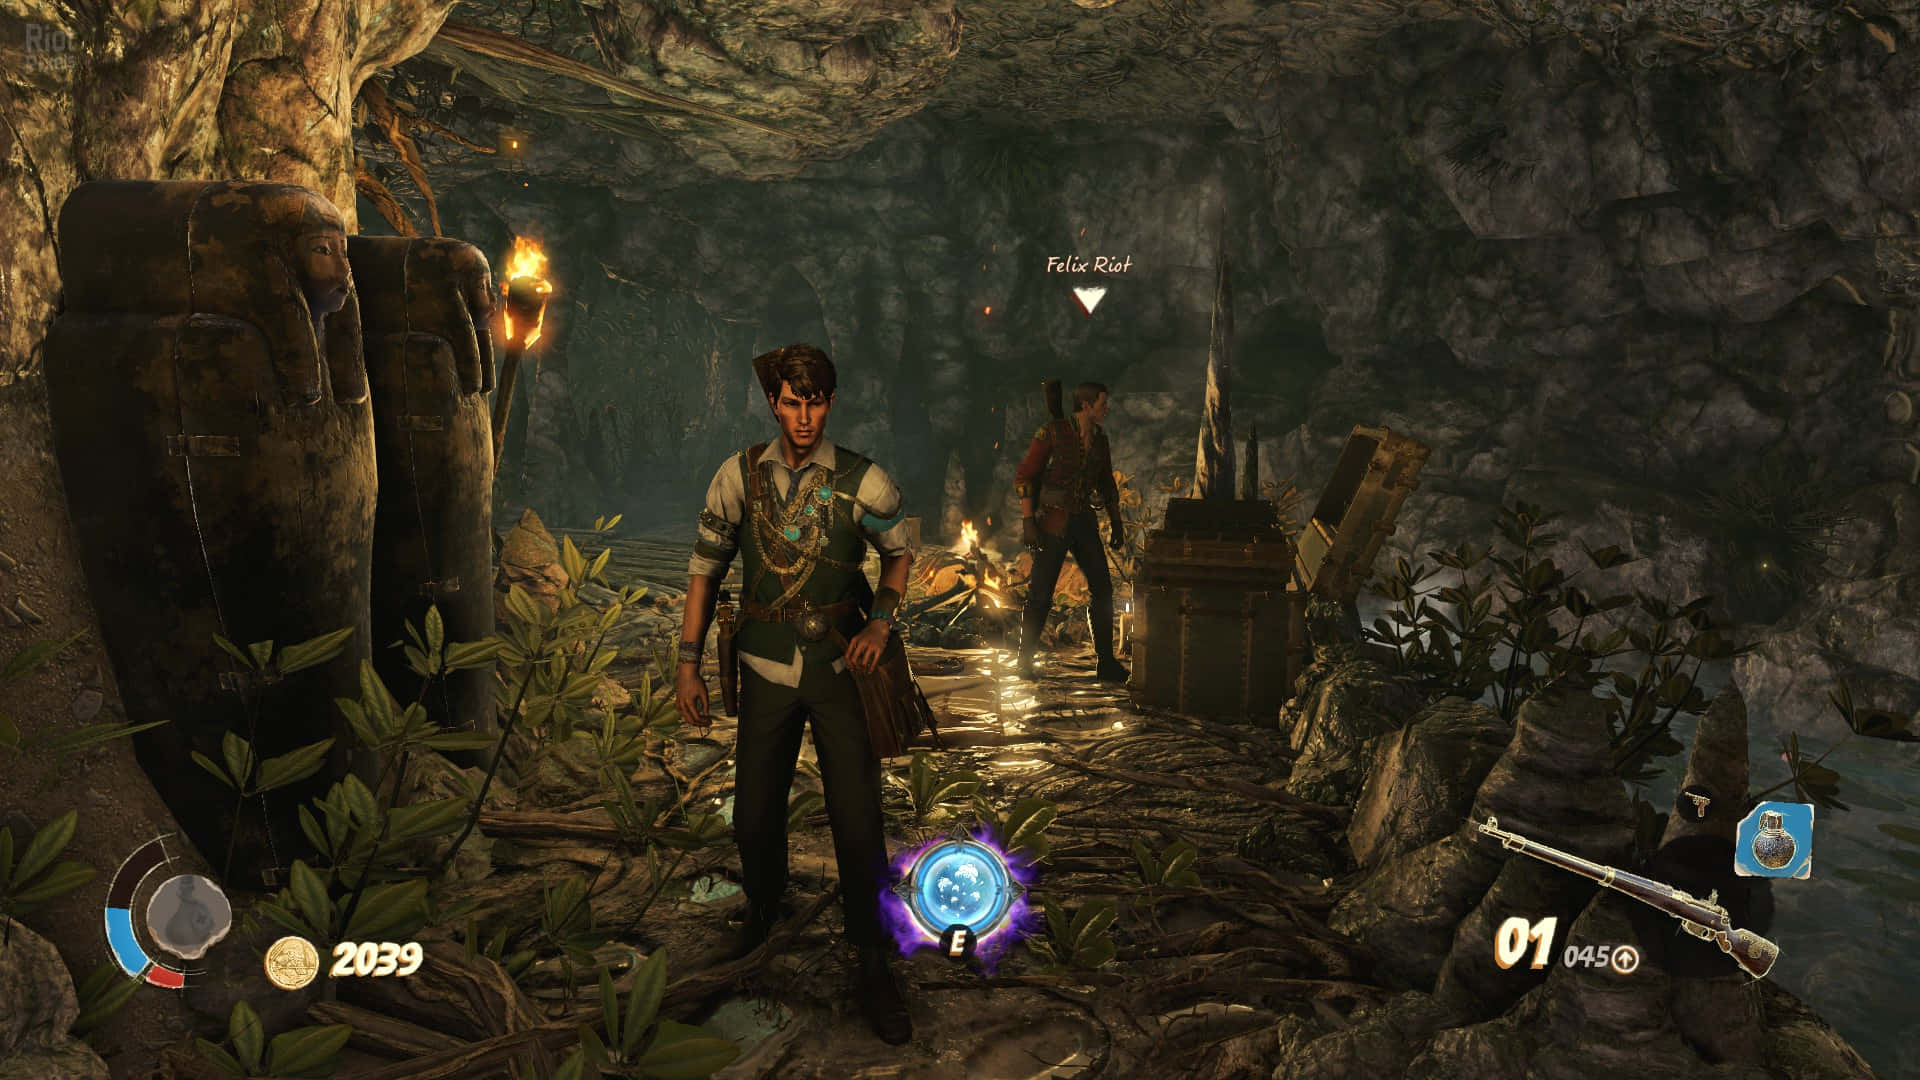 A Screenshot Of A Video Game Showing A Man In A Cave